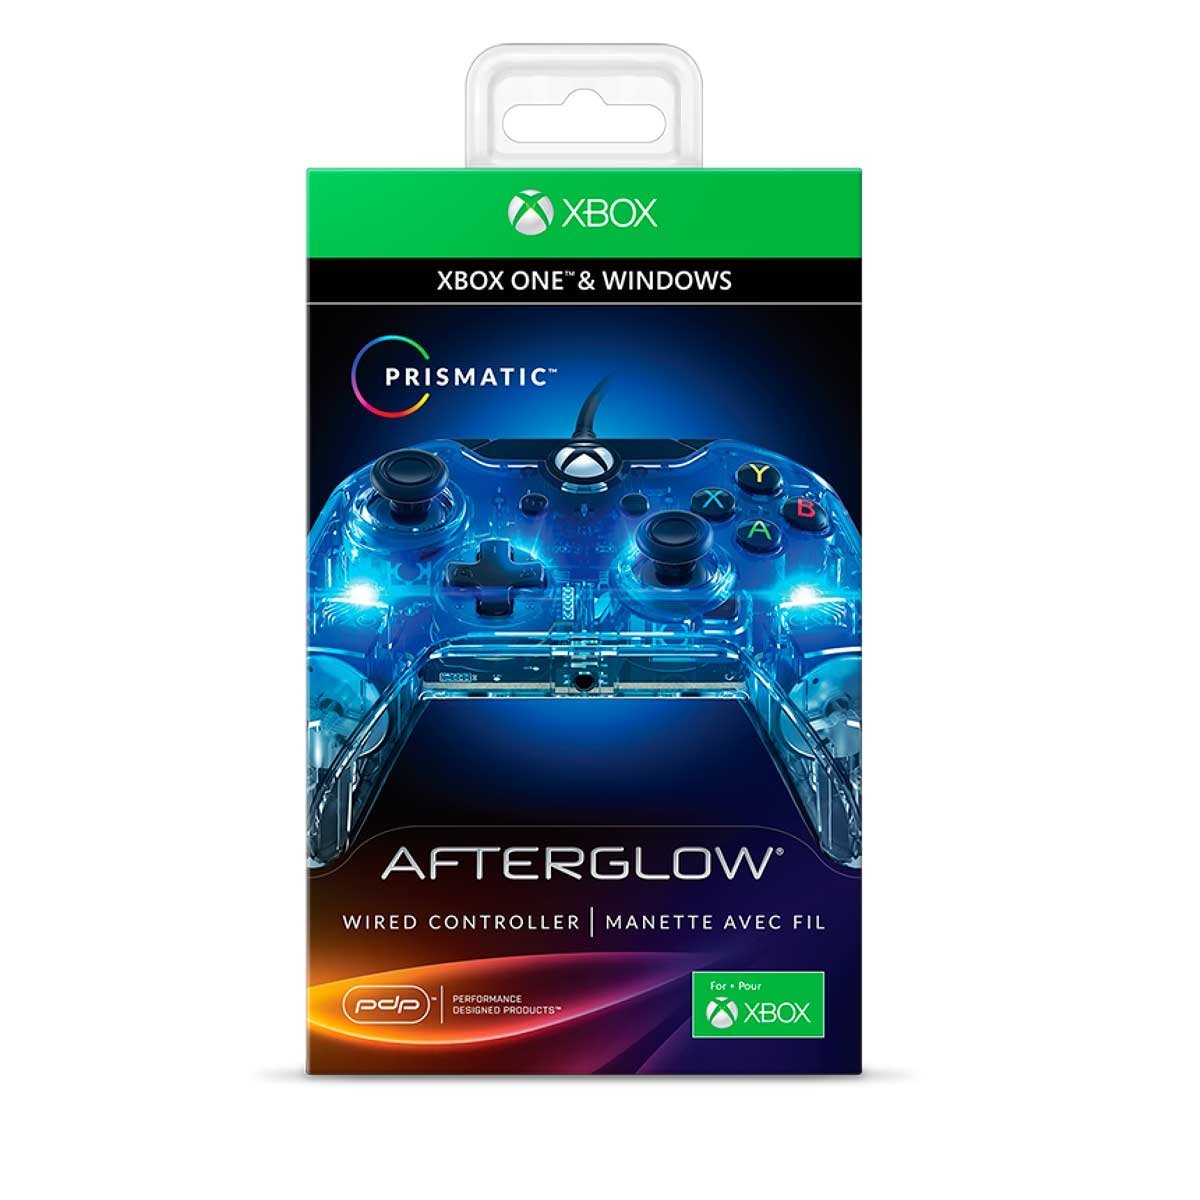 Xbox One Wired Control Afterglow Prismatic